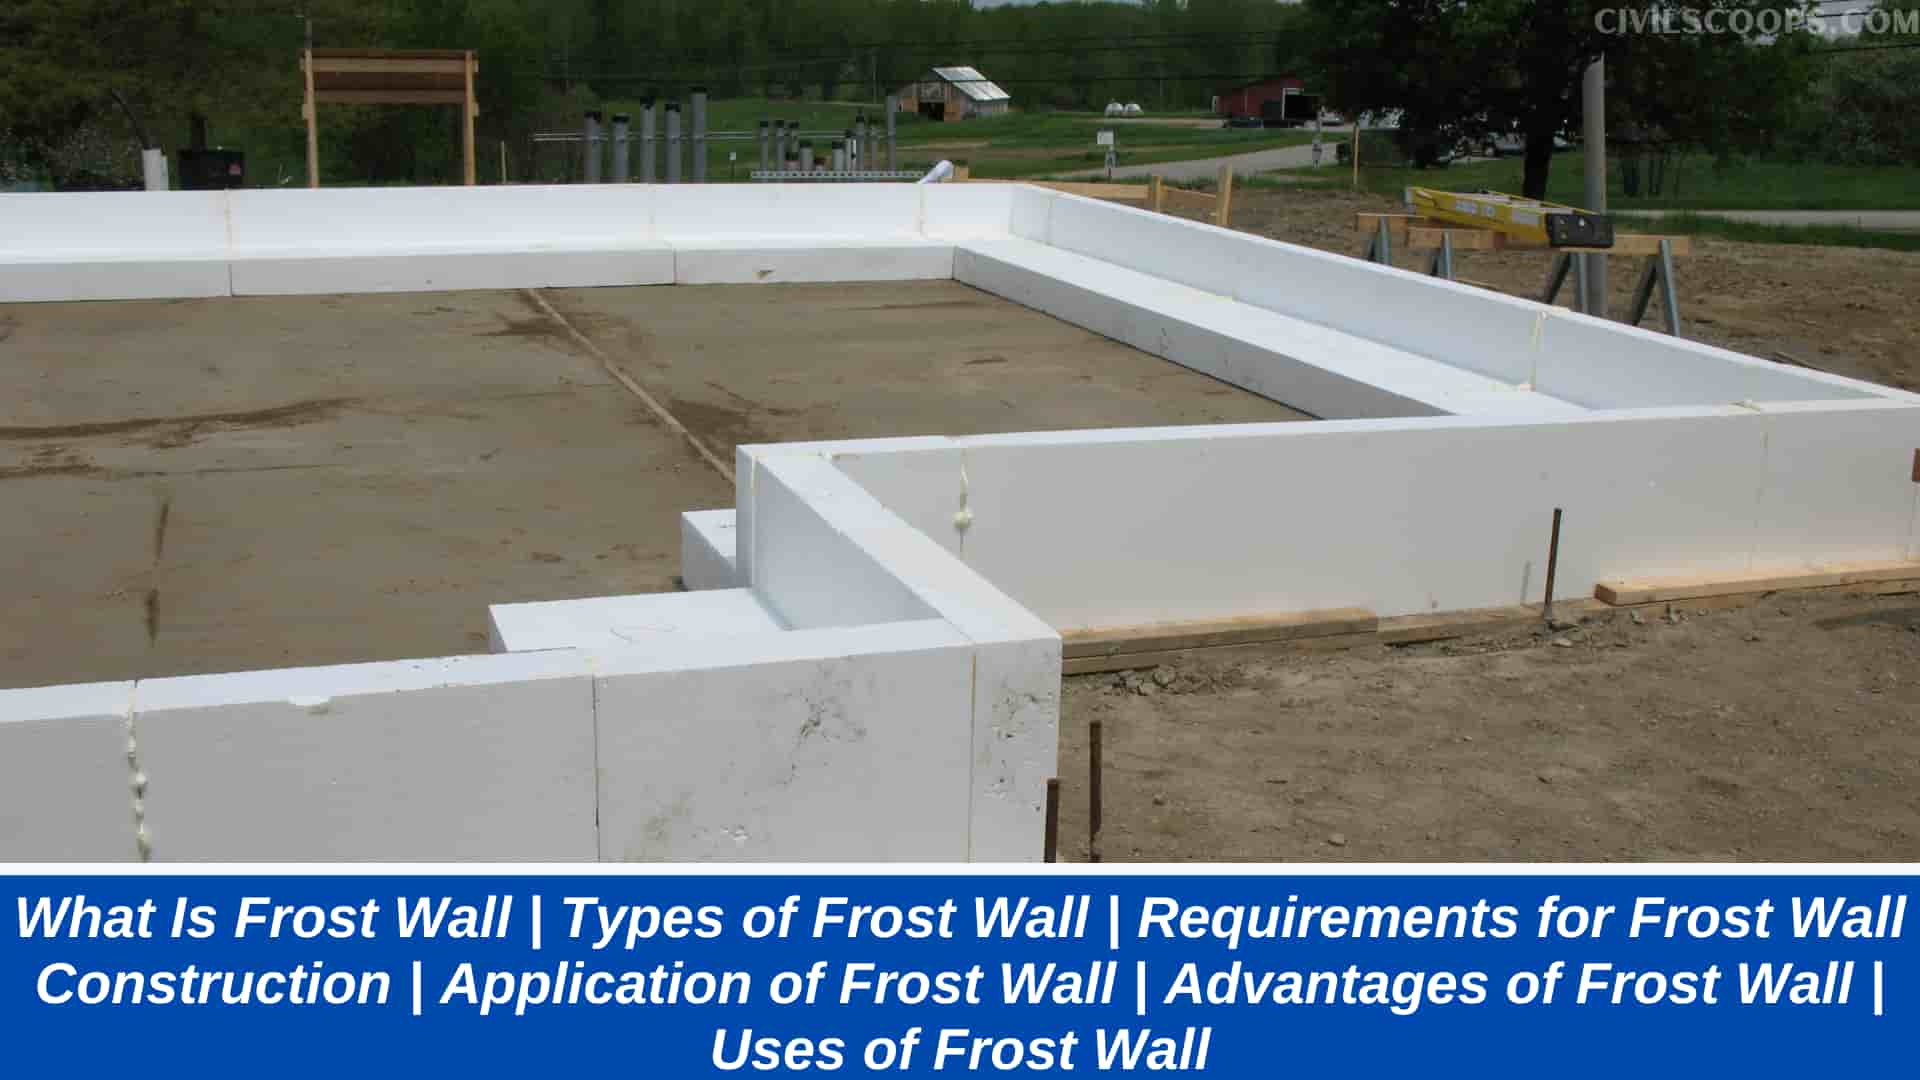 What Is Frost Wall | Types of Frost Wall | Requirements for Frost Wall Construction | Application of Frost Wall | Advantages of Frost Wall | Uses of Frost Wall